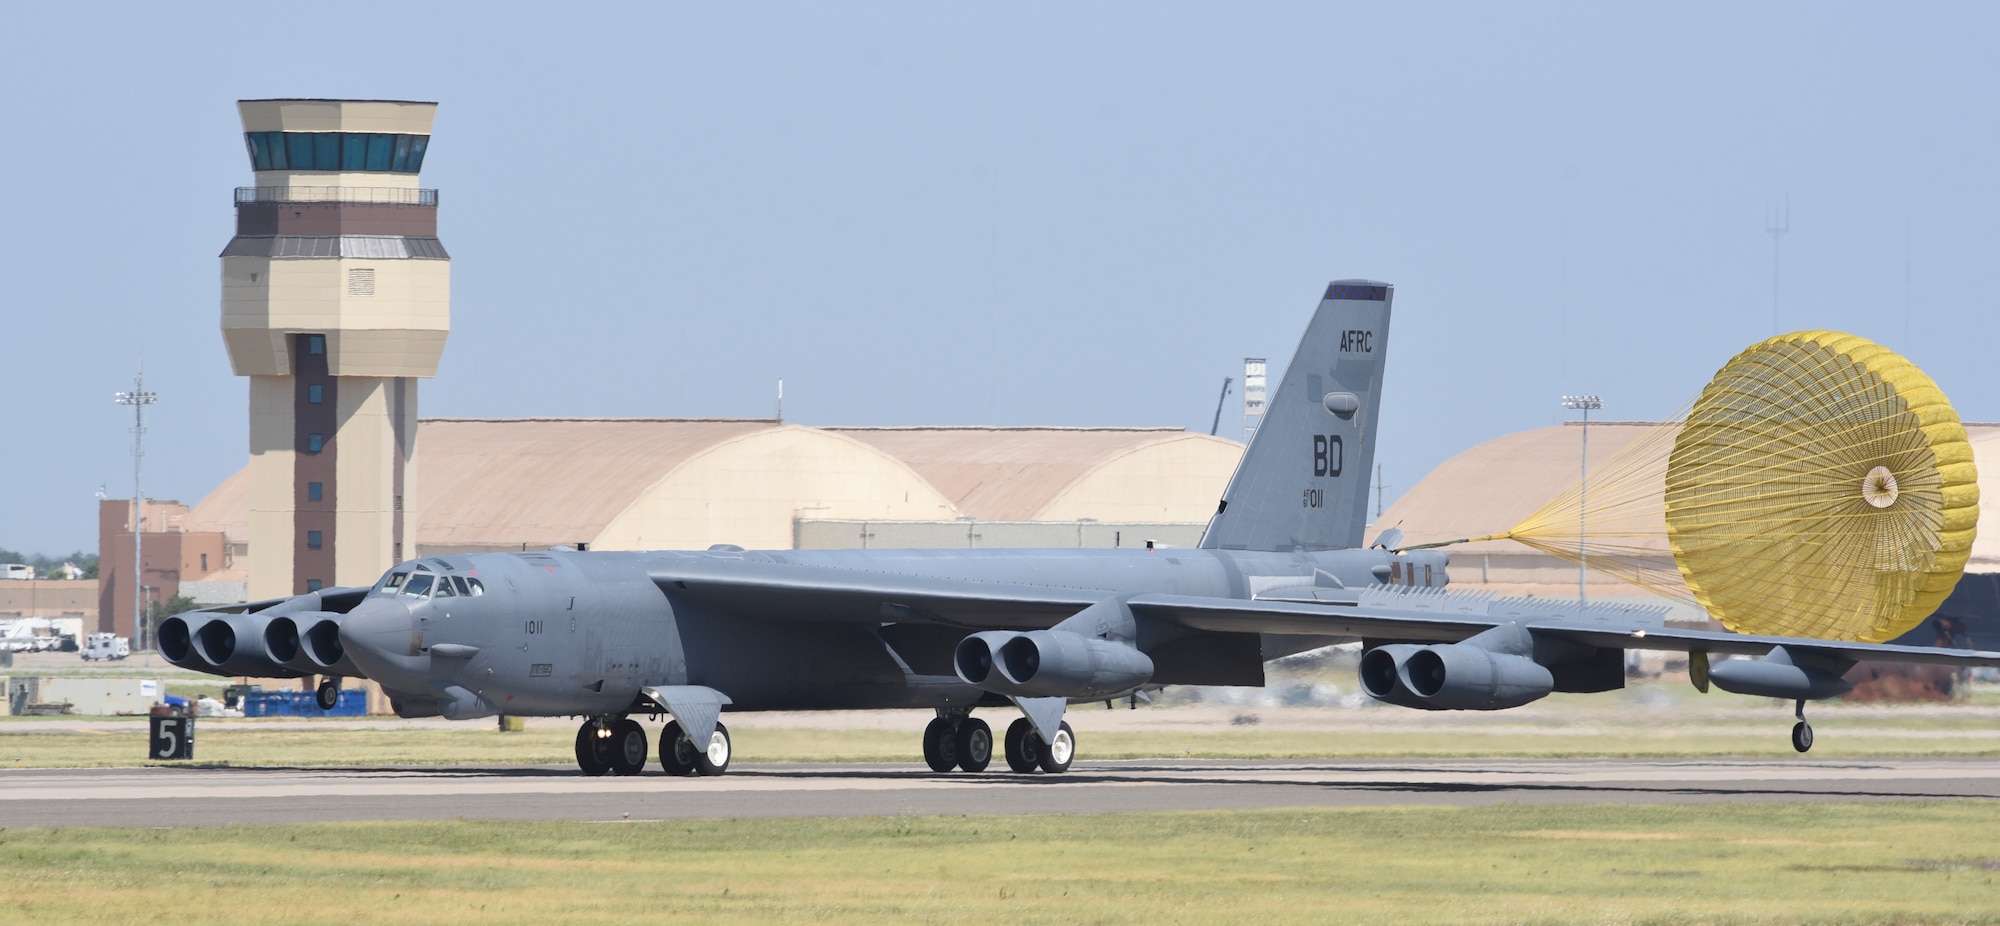 B-52H Stratofortress, serial # 61-0011, arrives at Tinker Air Force Base, Oklahoma on July 17, 2019 for induction to major overhaul by the Oklahoma City Air Logistics Complex after a ferry flight from San Antonio, Texas. 61-0011 was flown gear-down by a crew from the 10th Flight Test Squadron, Air Force Reserve Command, from Boeing's facility after receiving 'milk-bottle' replacements to extend the service life of the aircraft by replacing the wing-attachment points. (U.S. Air Force photo/Greg L. Davis)